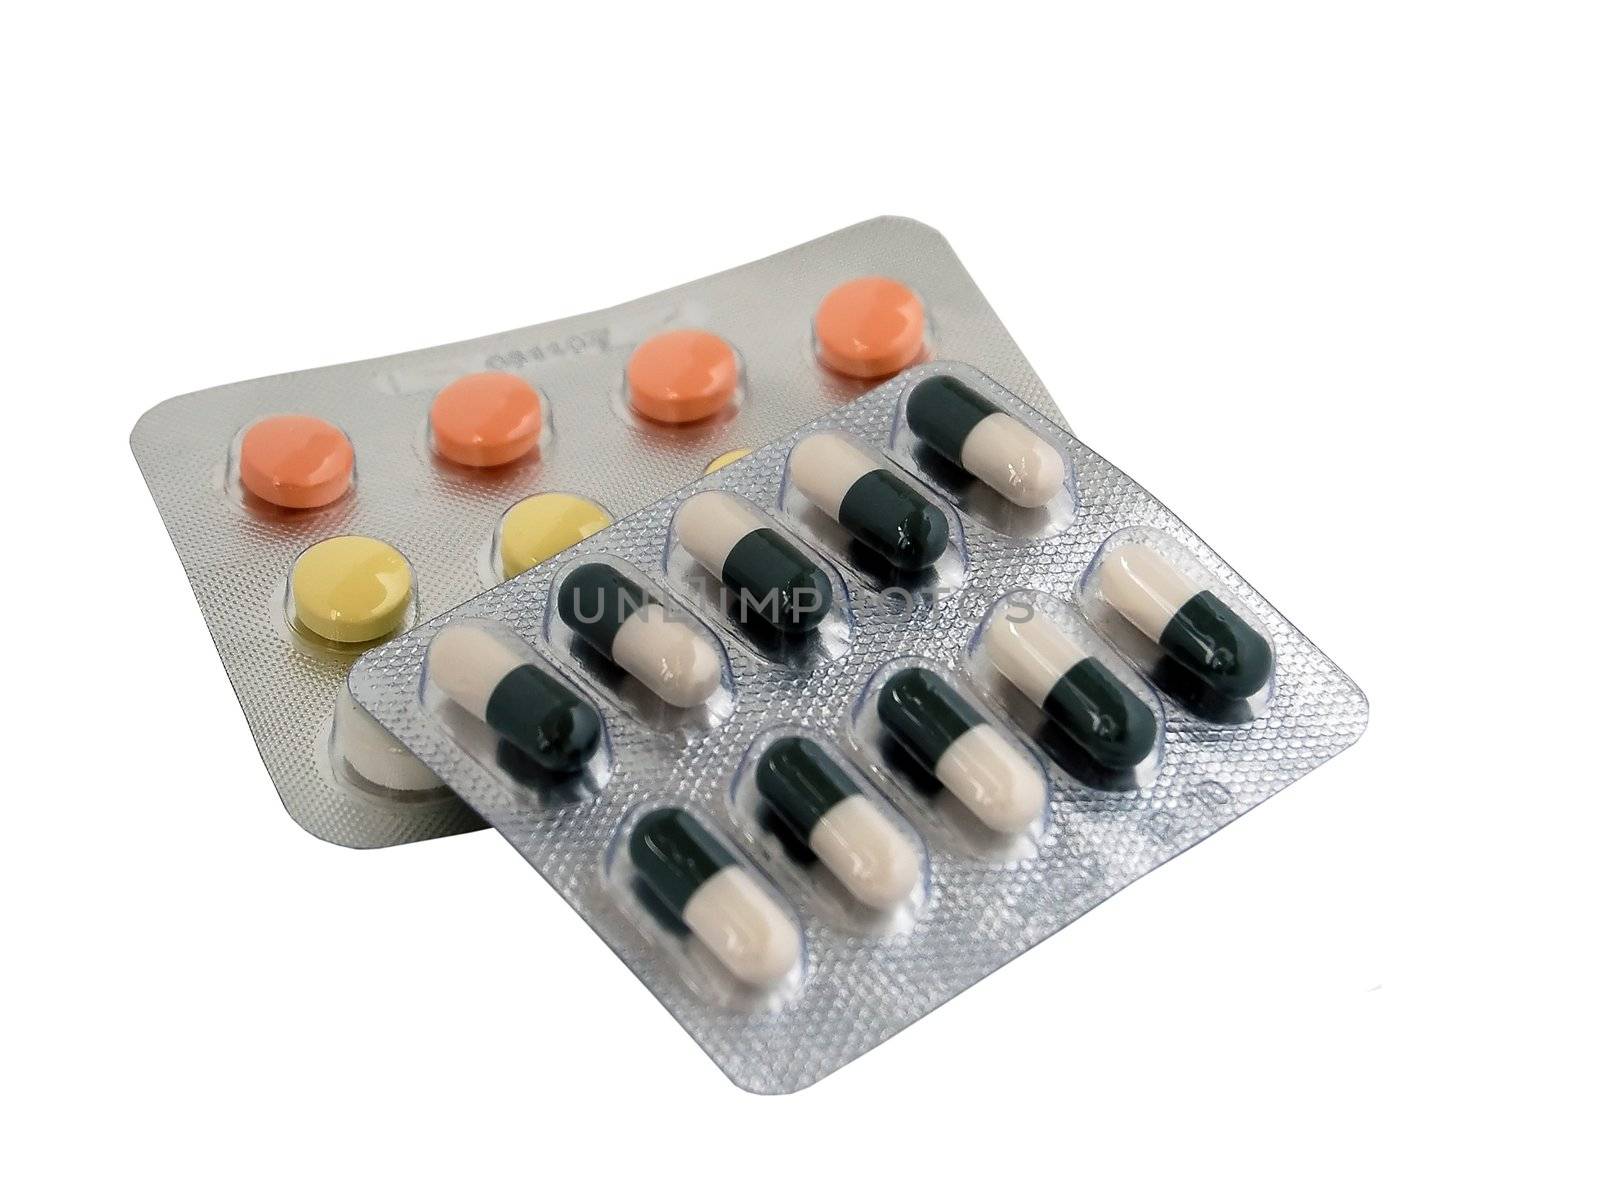 colored pills and tablets by mettus